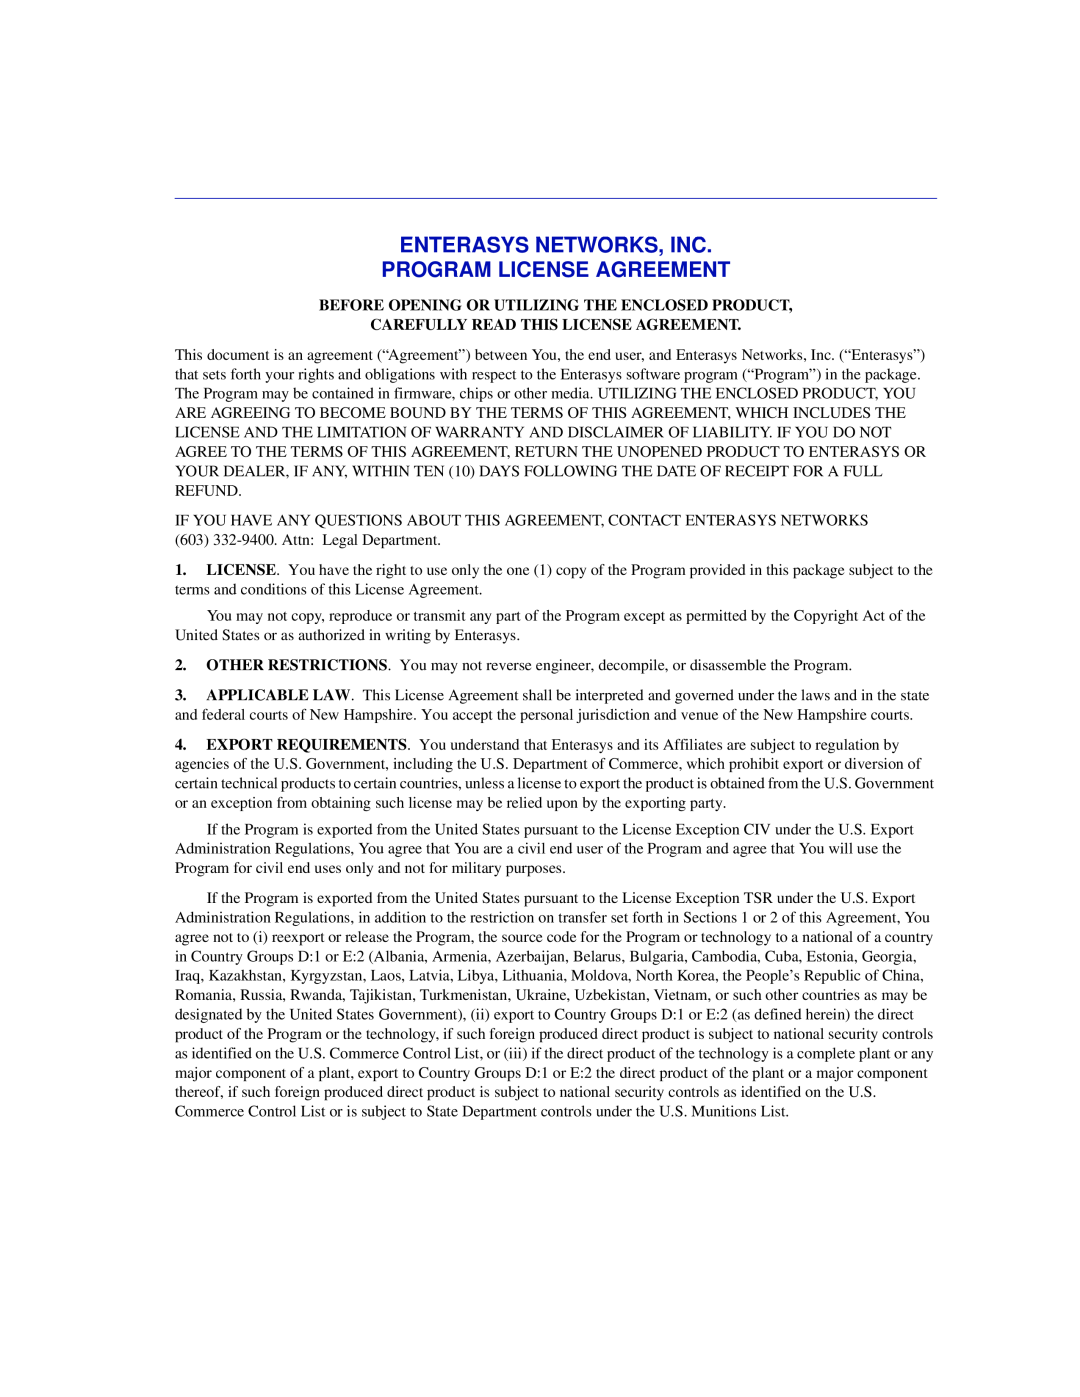 Enterasys Networks 6H302-48 manual Enterasys Networks, Inc Program License Agreement, Carefully Read This License Agreement 